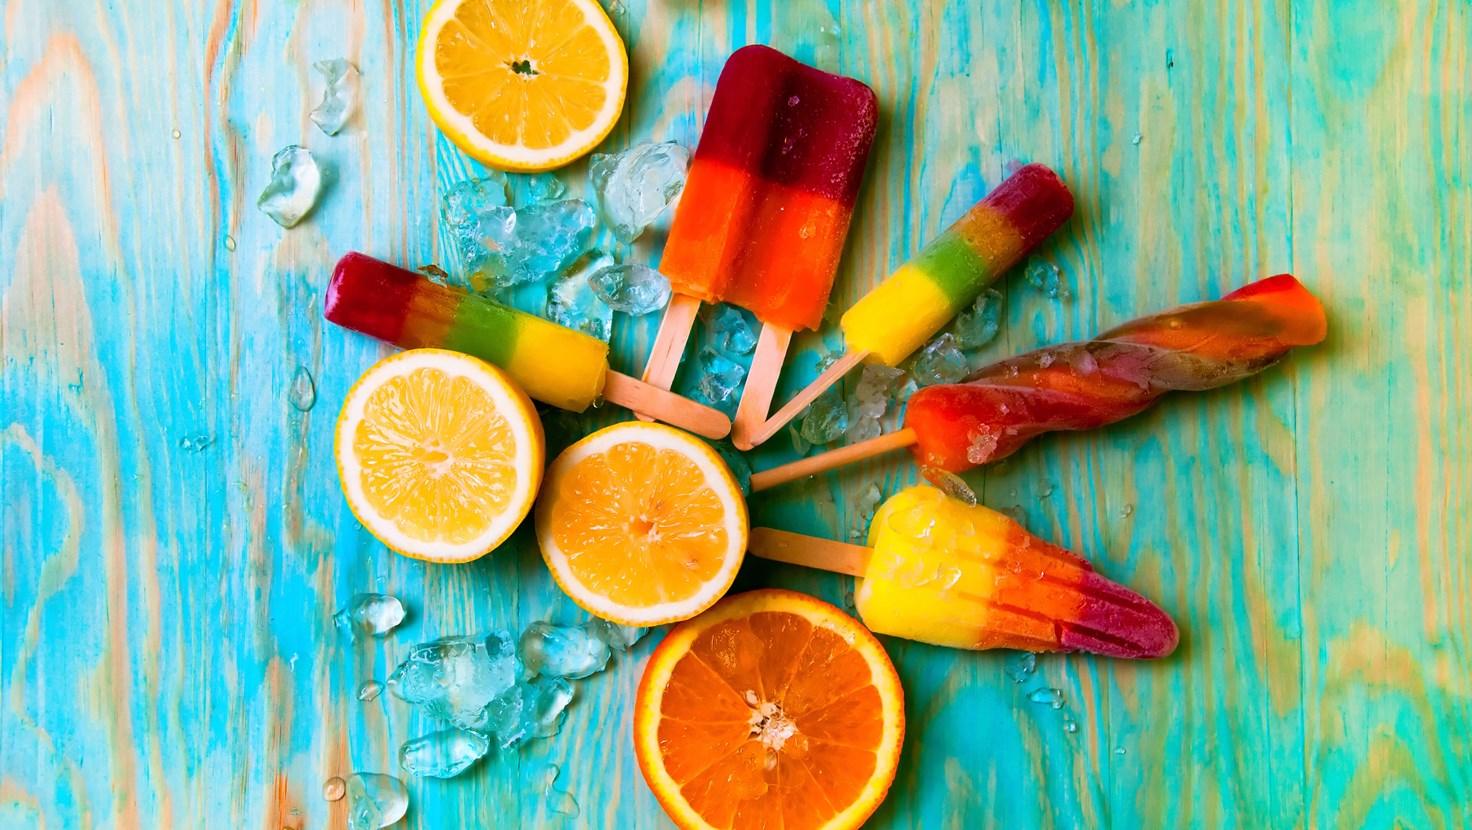 Ice Lollies Made With Palsgaard Waterice Stabiliser